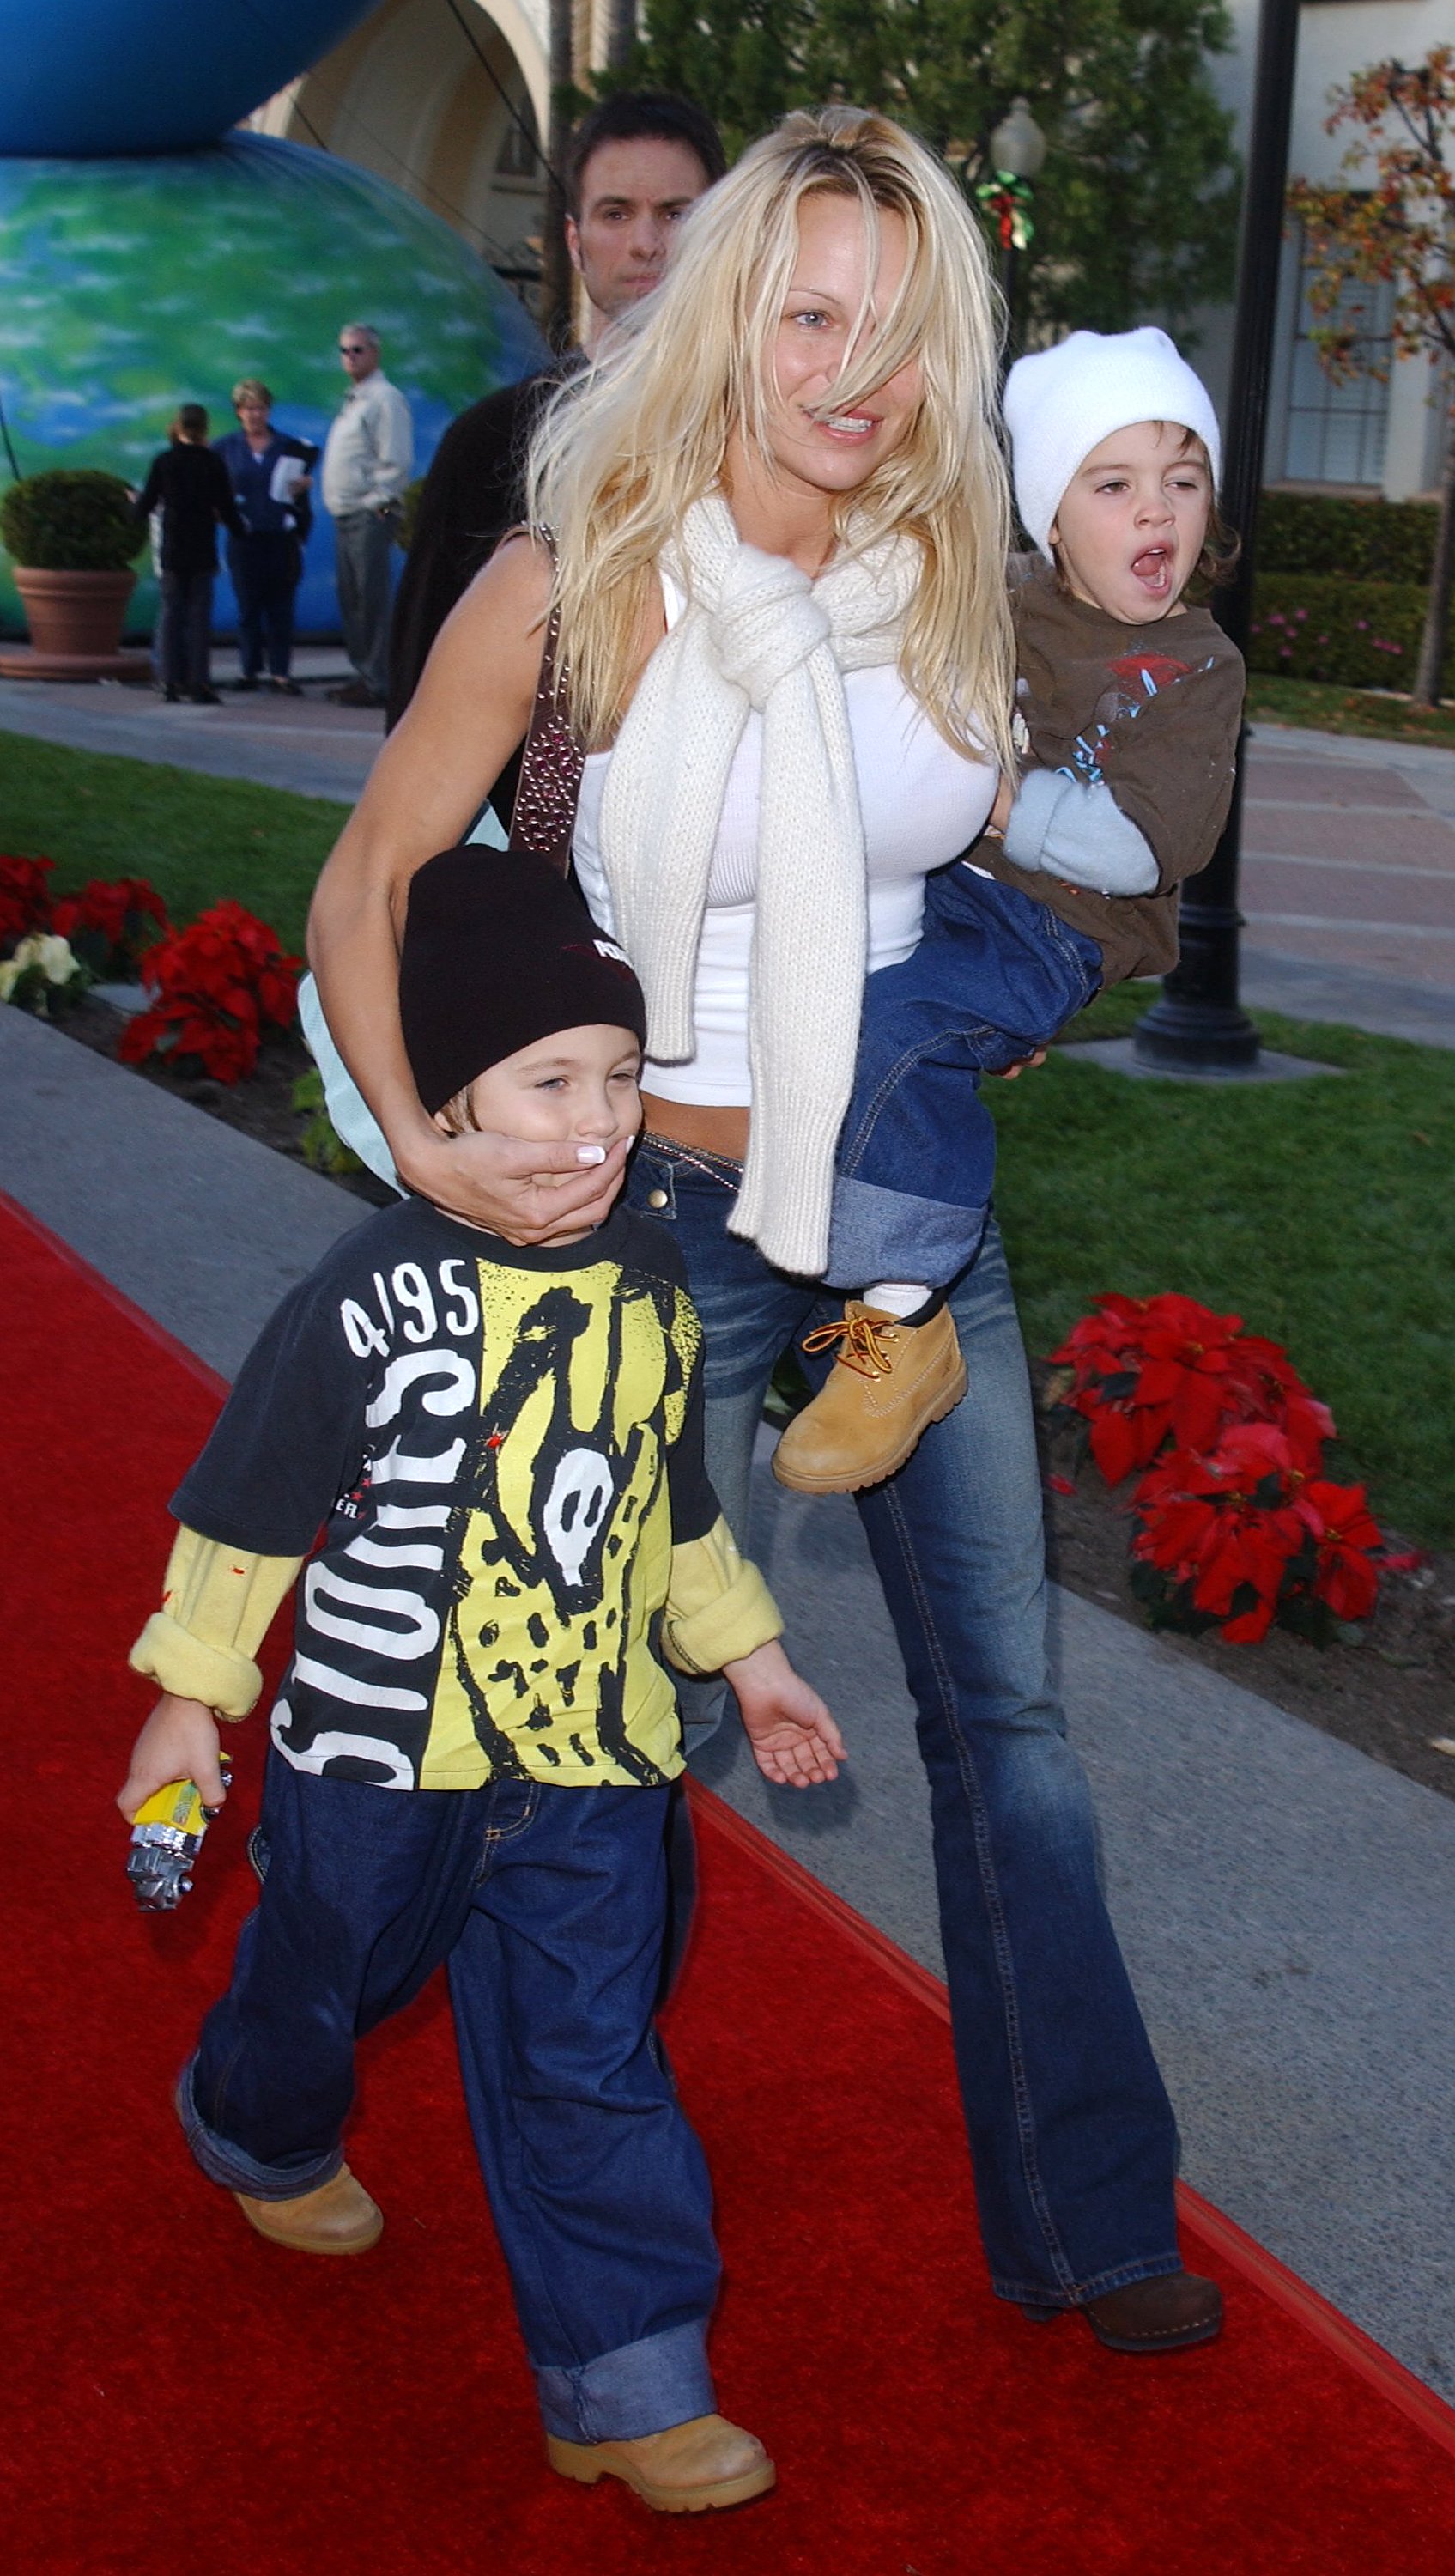 Pamela Anderson and sons Dylan (L) and Brandon (R) attend the premiere of "Jimmy Neutron: Boy Genius" on December 9, 2001, at Paramount Studios, in Hollywood. | Source: Getty Images